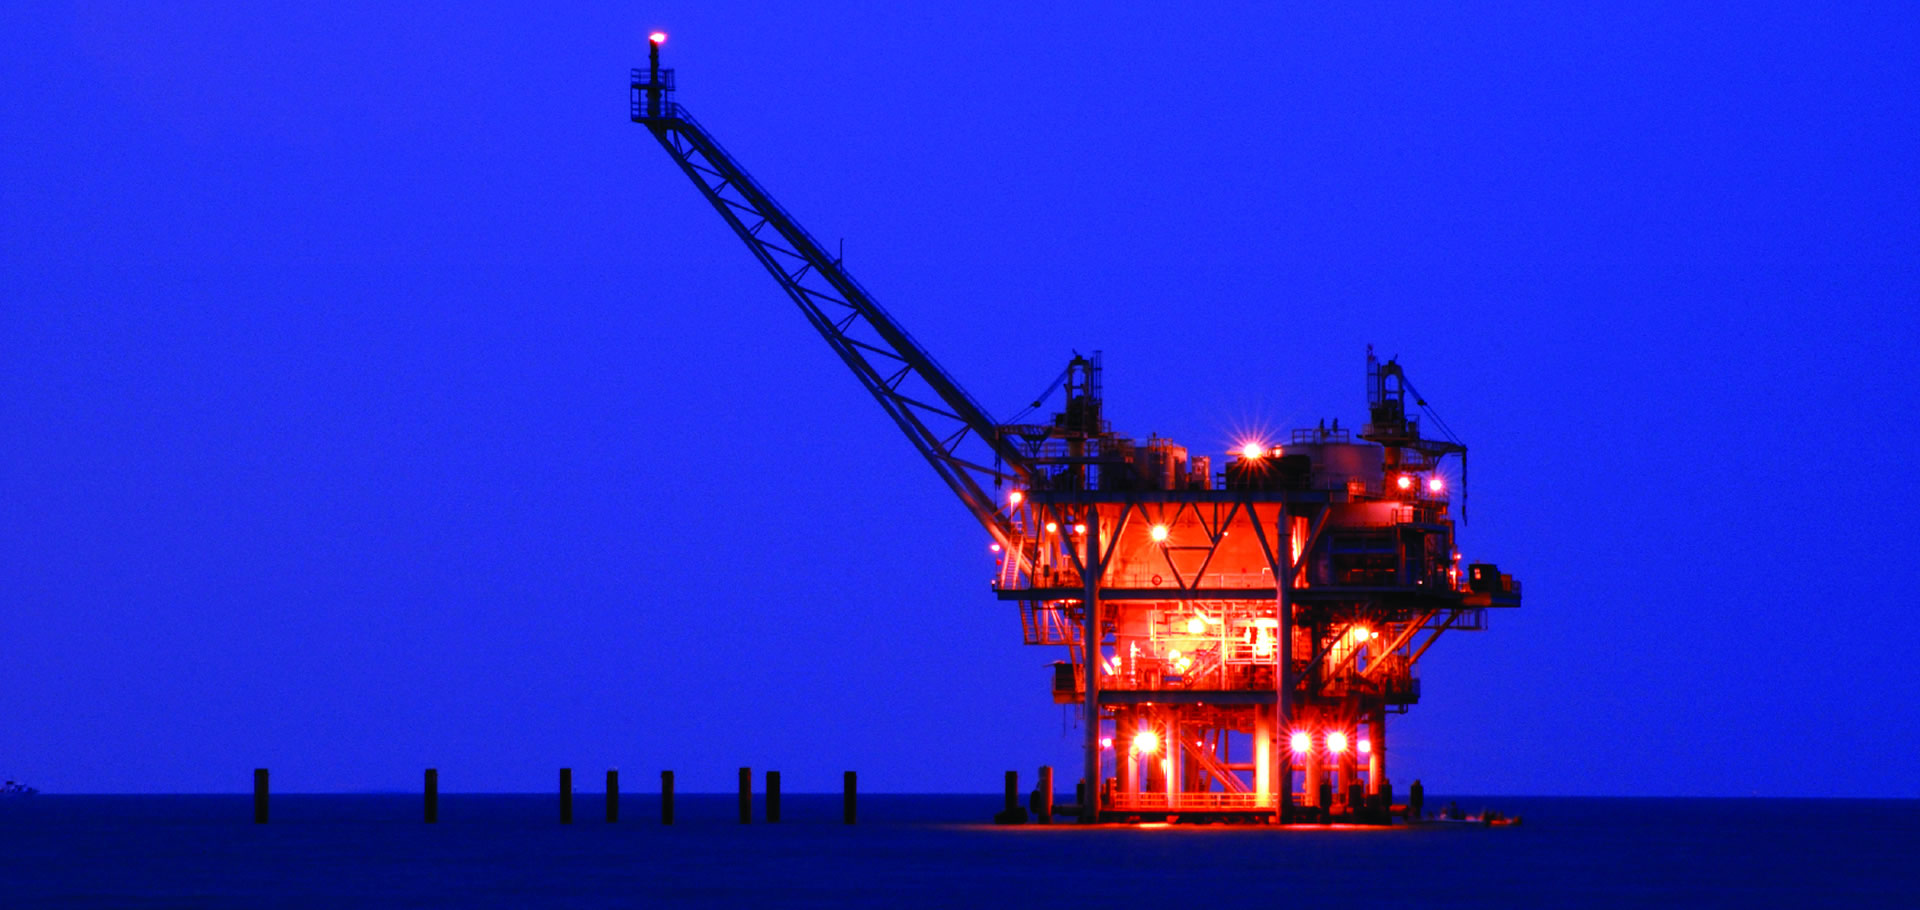 offshore oil rig at night